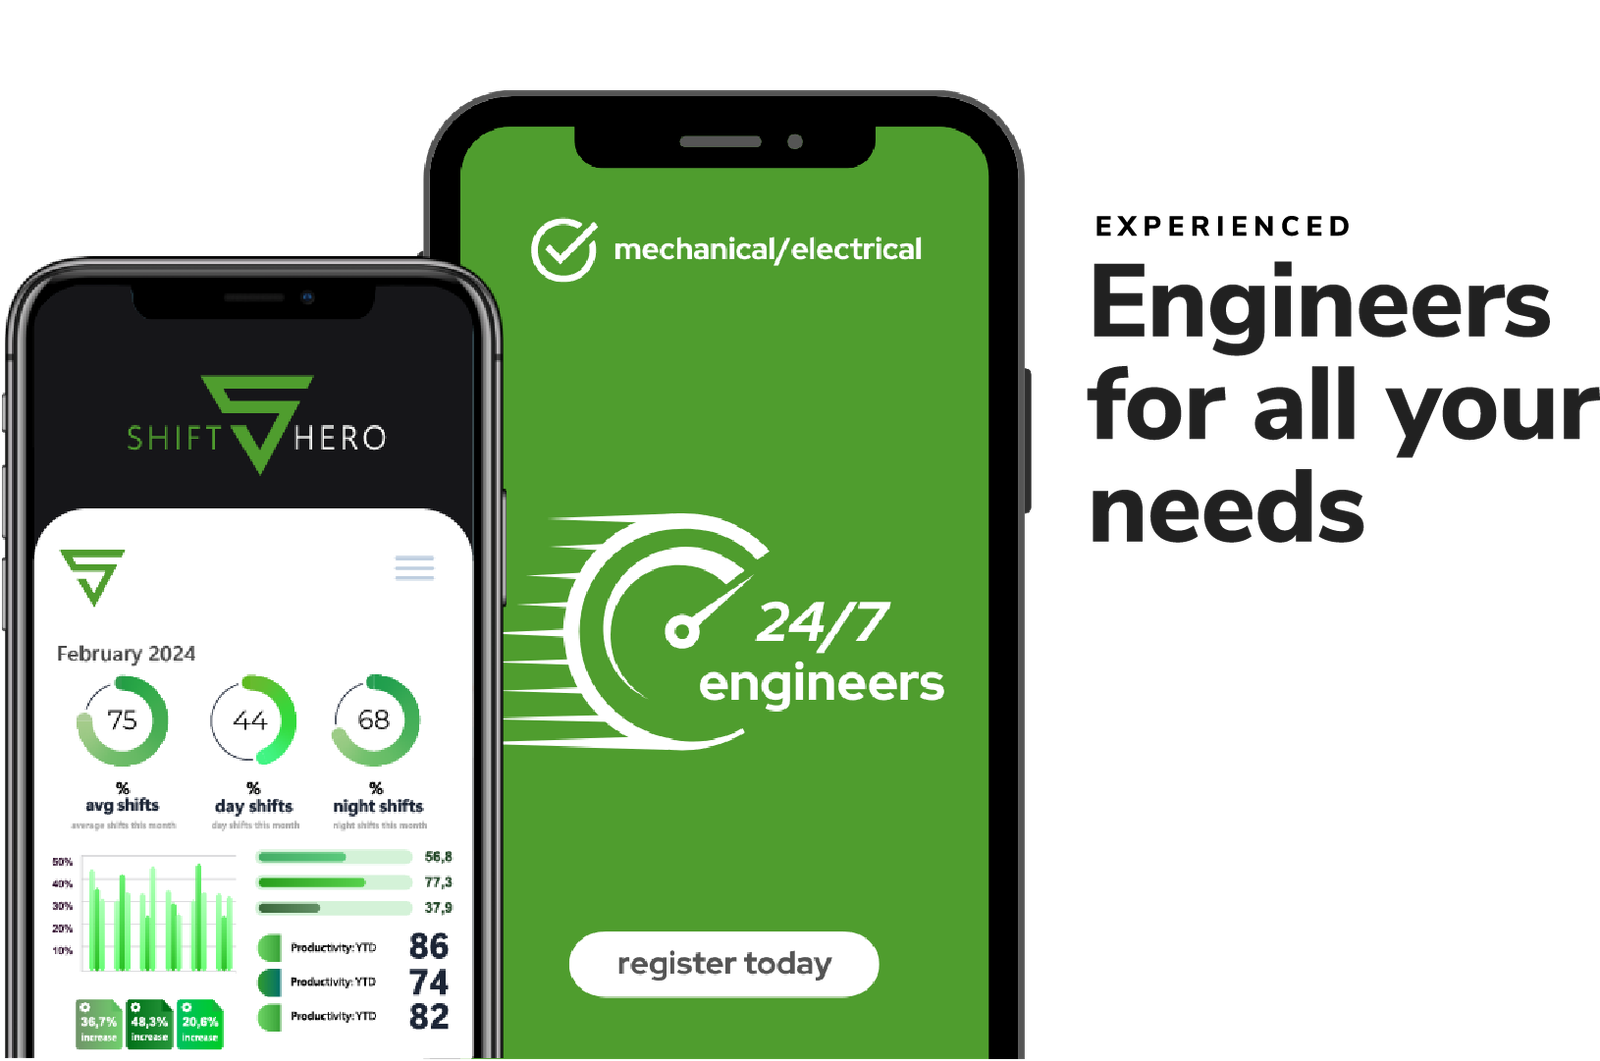 Shift Hero mobile app view of the shift cover mobile application for maintenance engineering